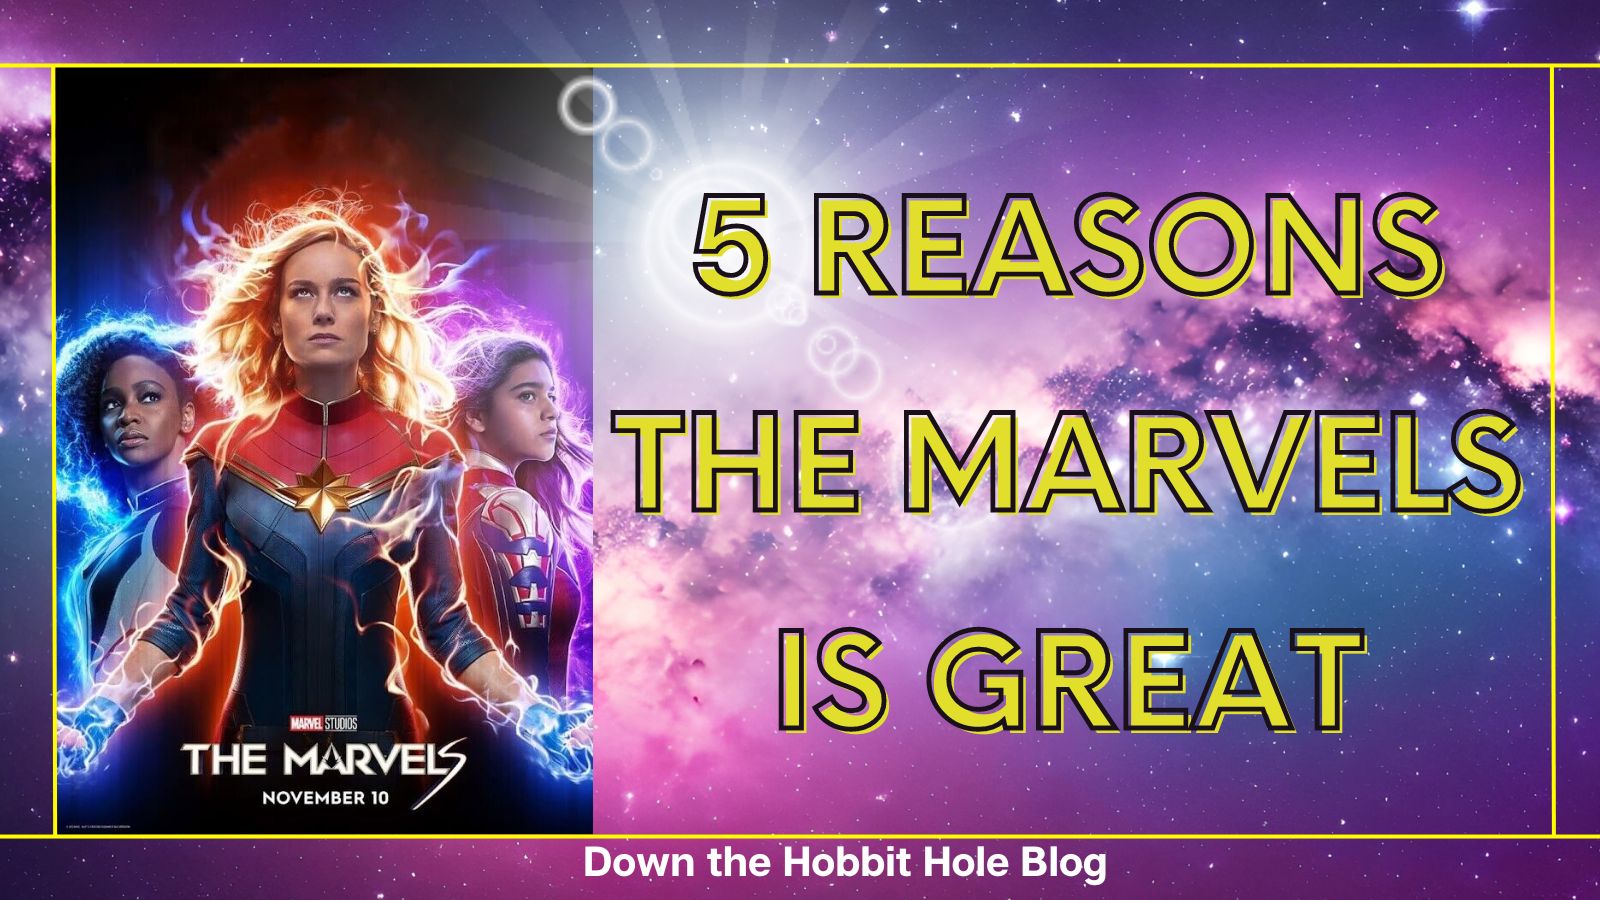 Is The Marvels a good movie to watch? 5 reasons it's great with movie poster and galaxy background